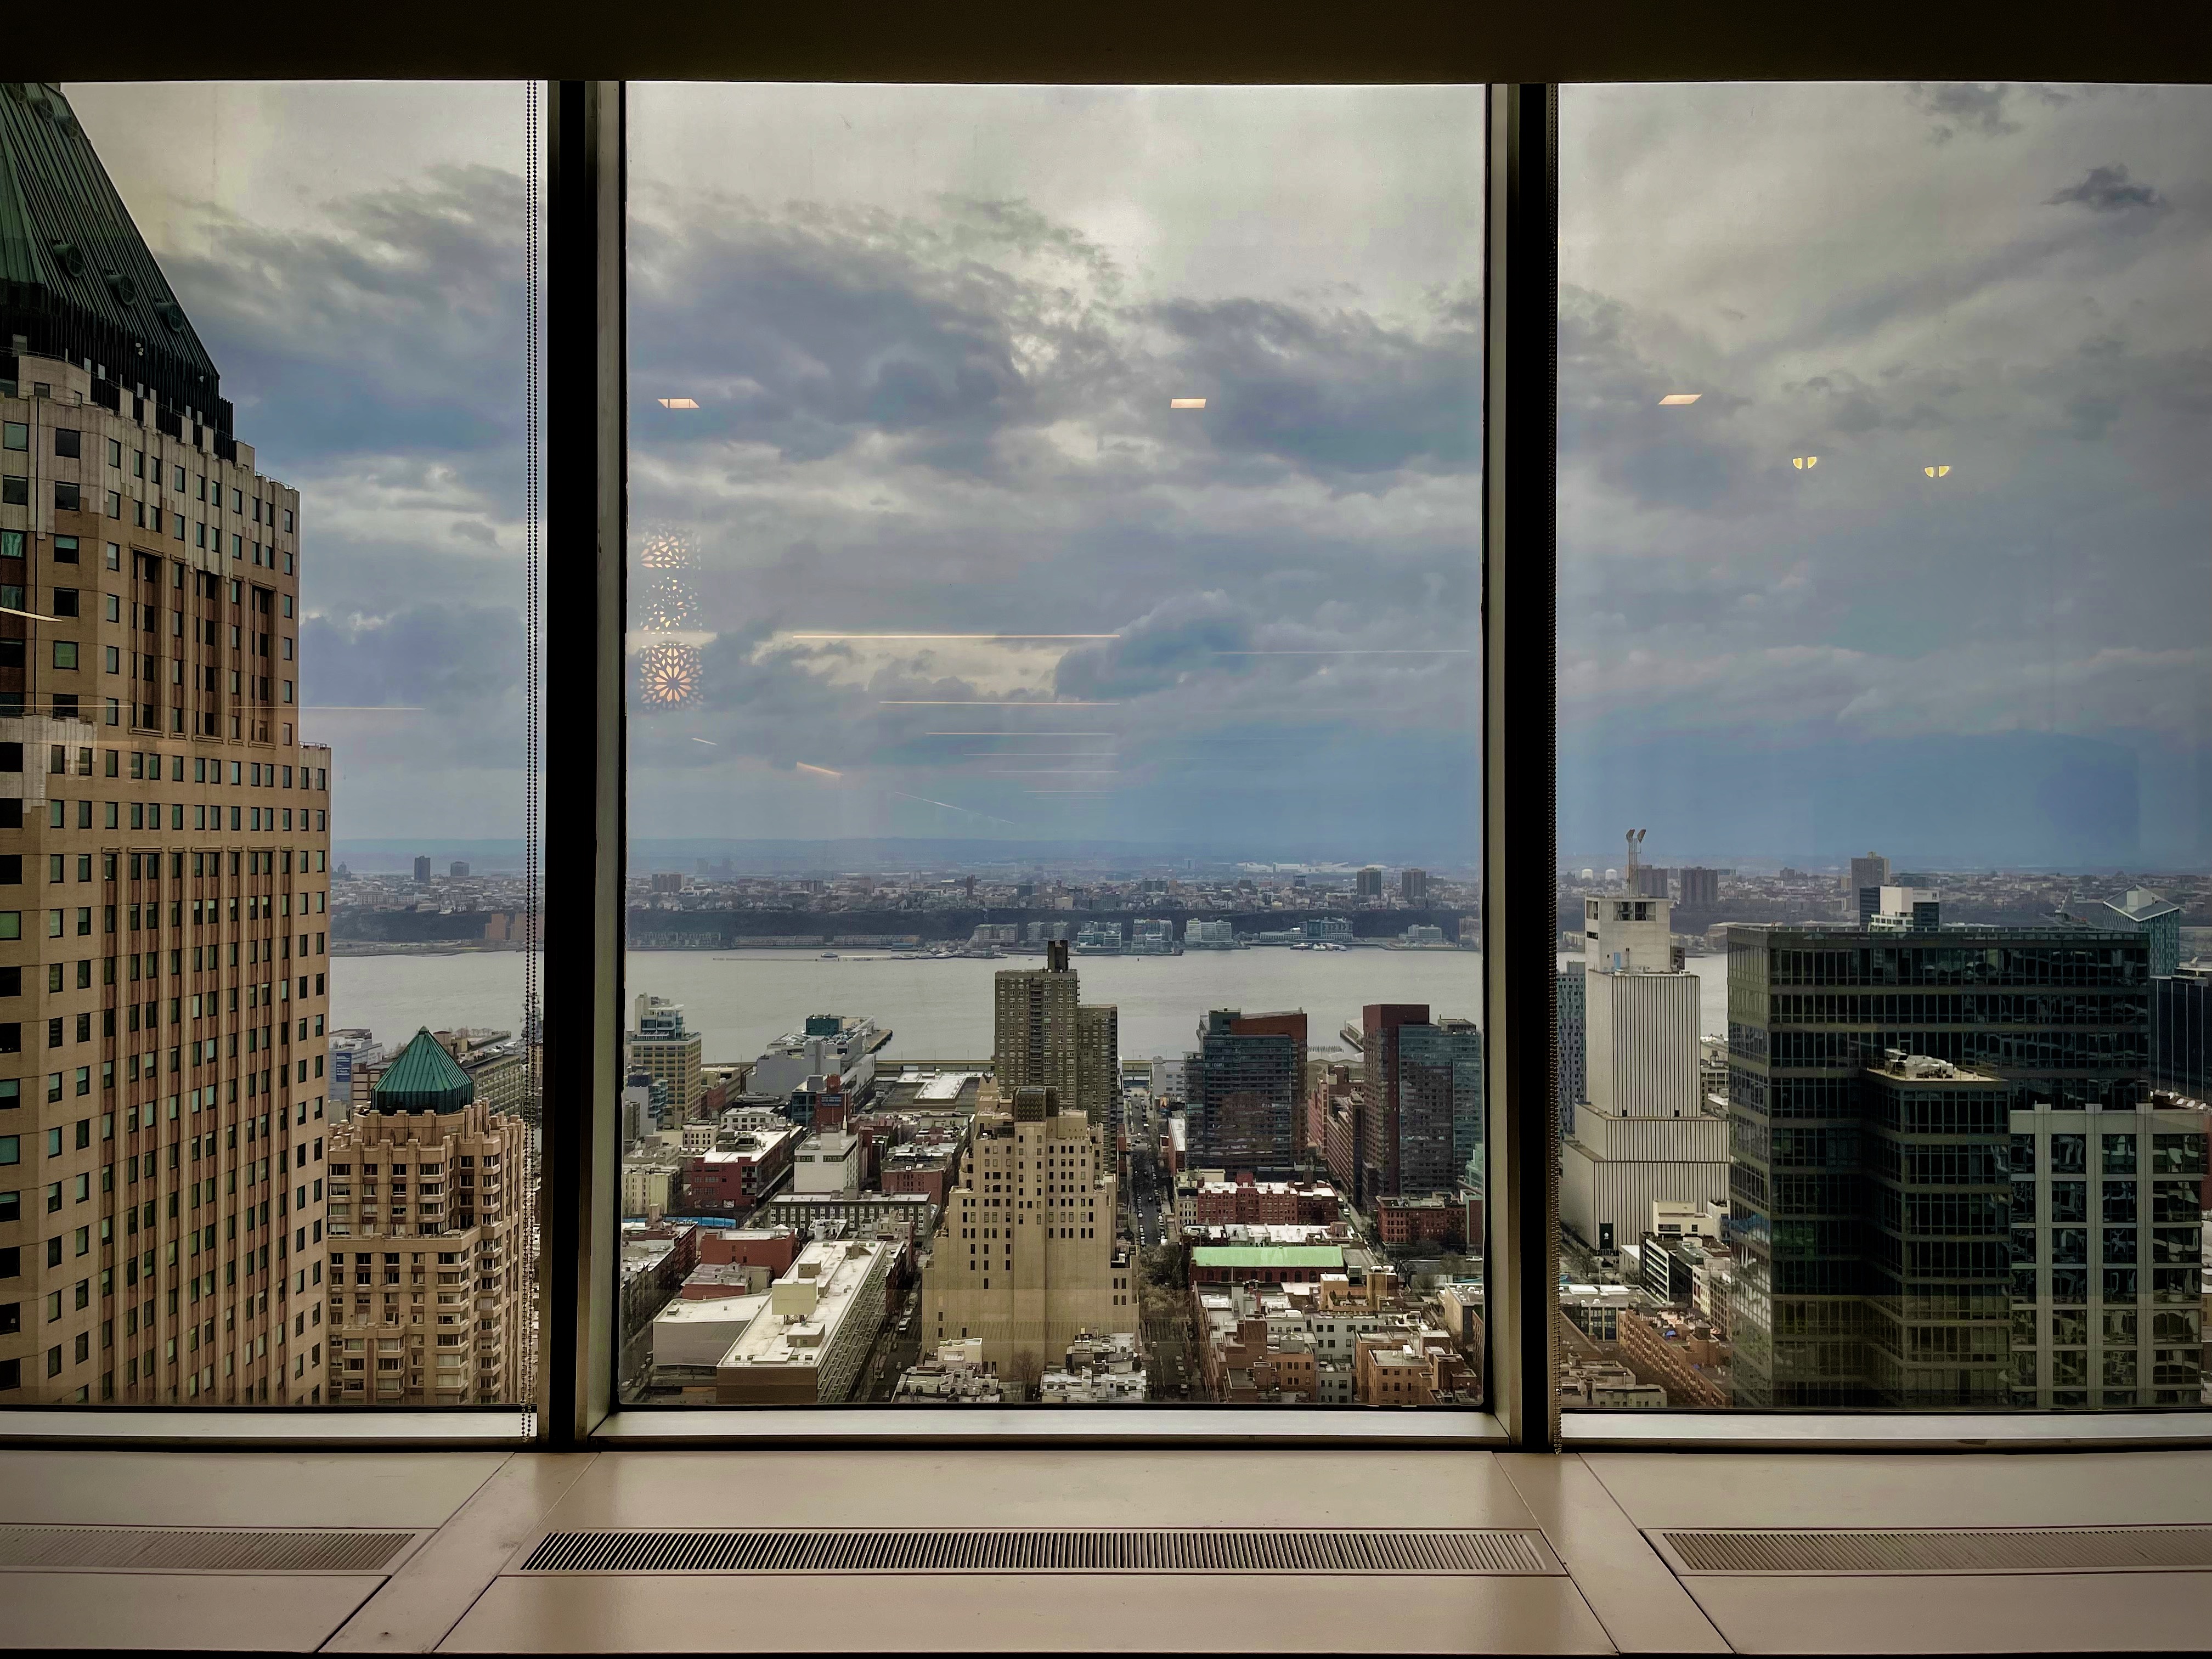 View of Manhattan and Hudson River, through office windows from high in a skyscraper.